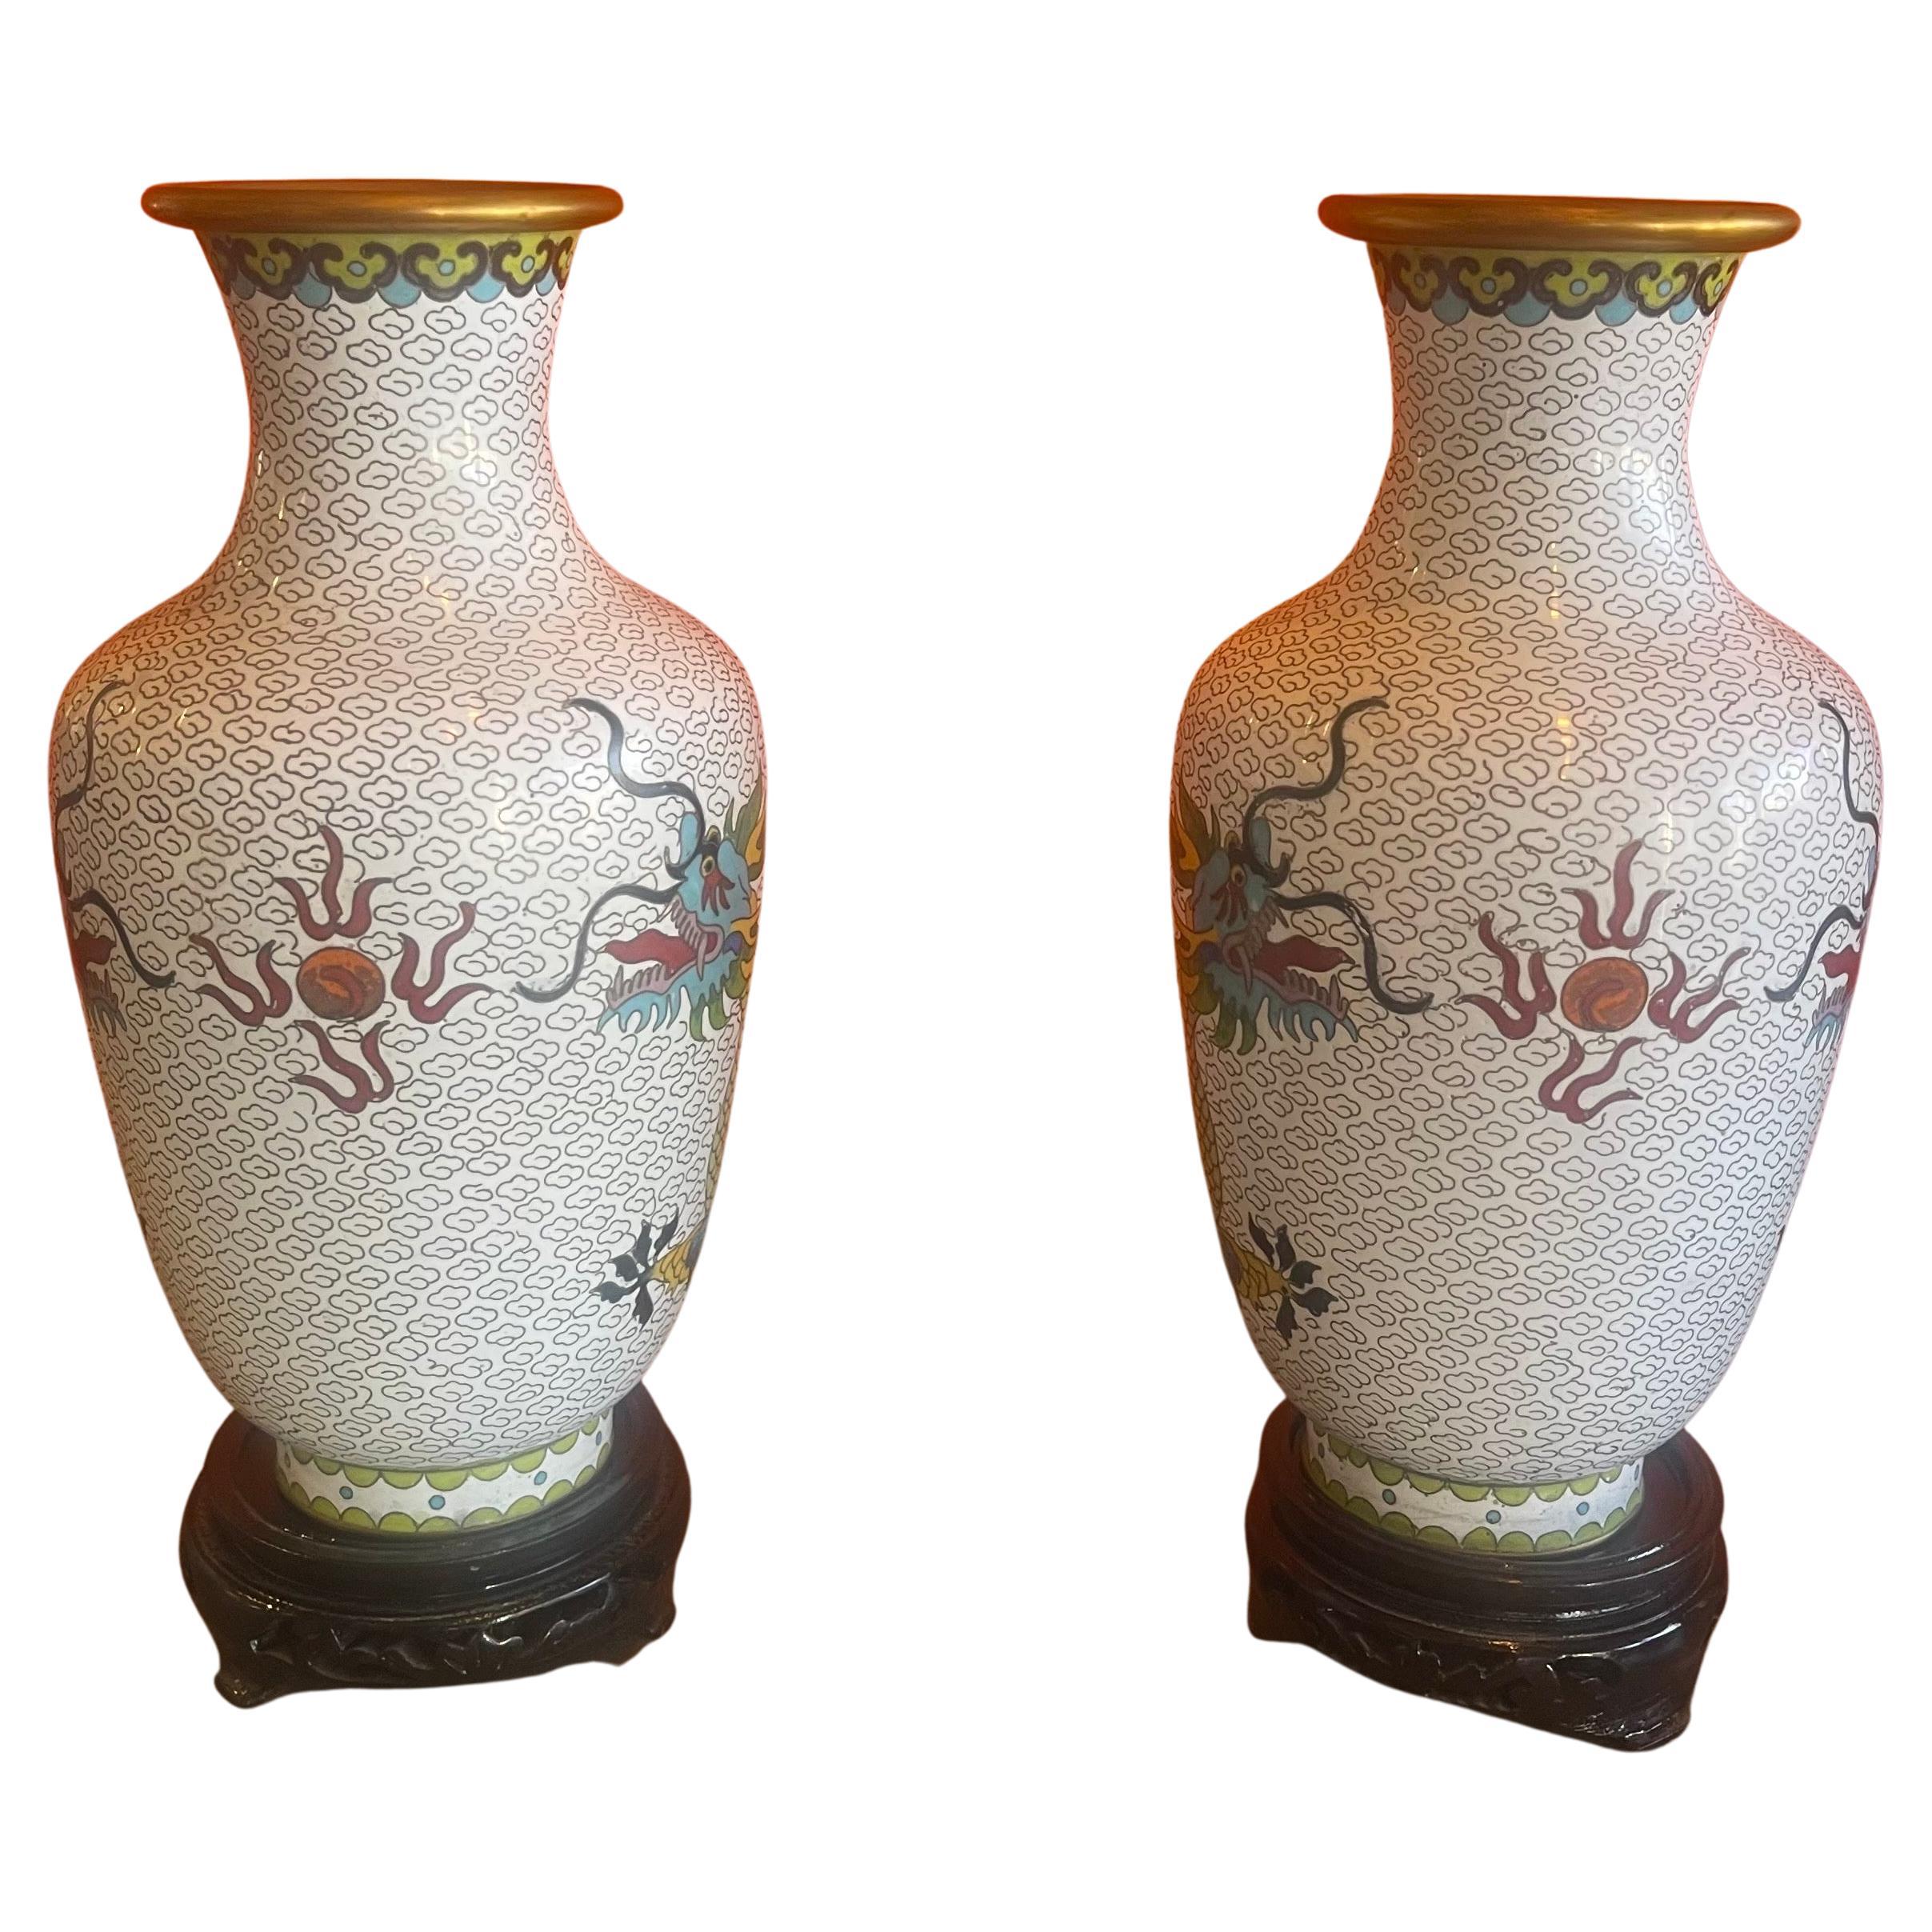 A nice mirrored pair of Chinese cloisonne vases with dragon motif, circa 1960s. The vases are in very good condition with no dings or dents and measure 5.25